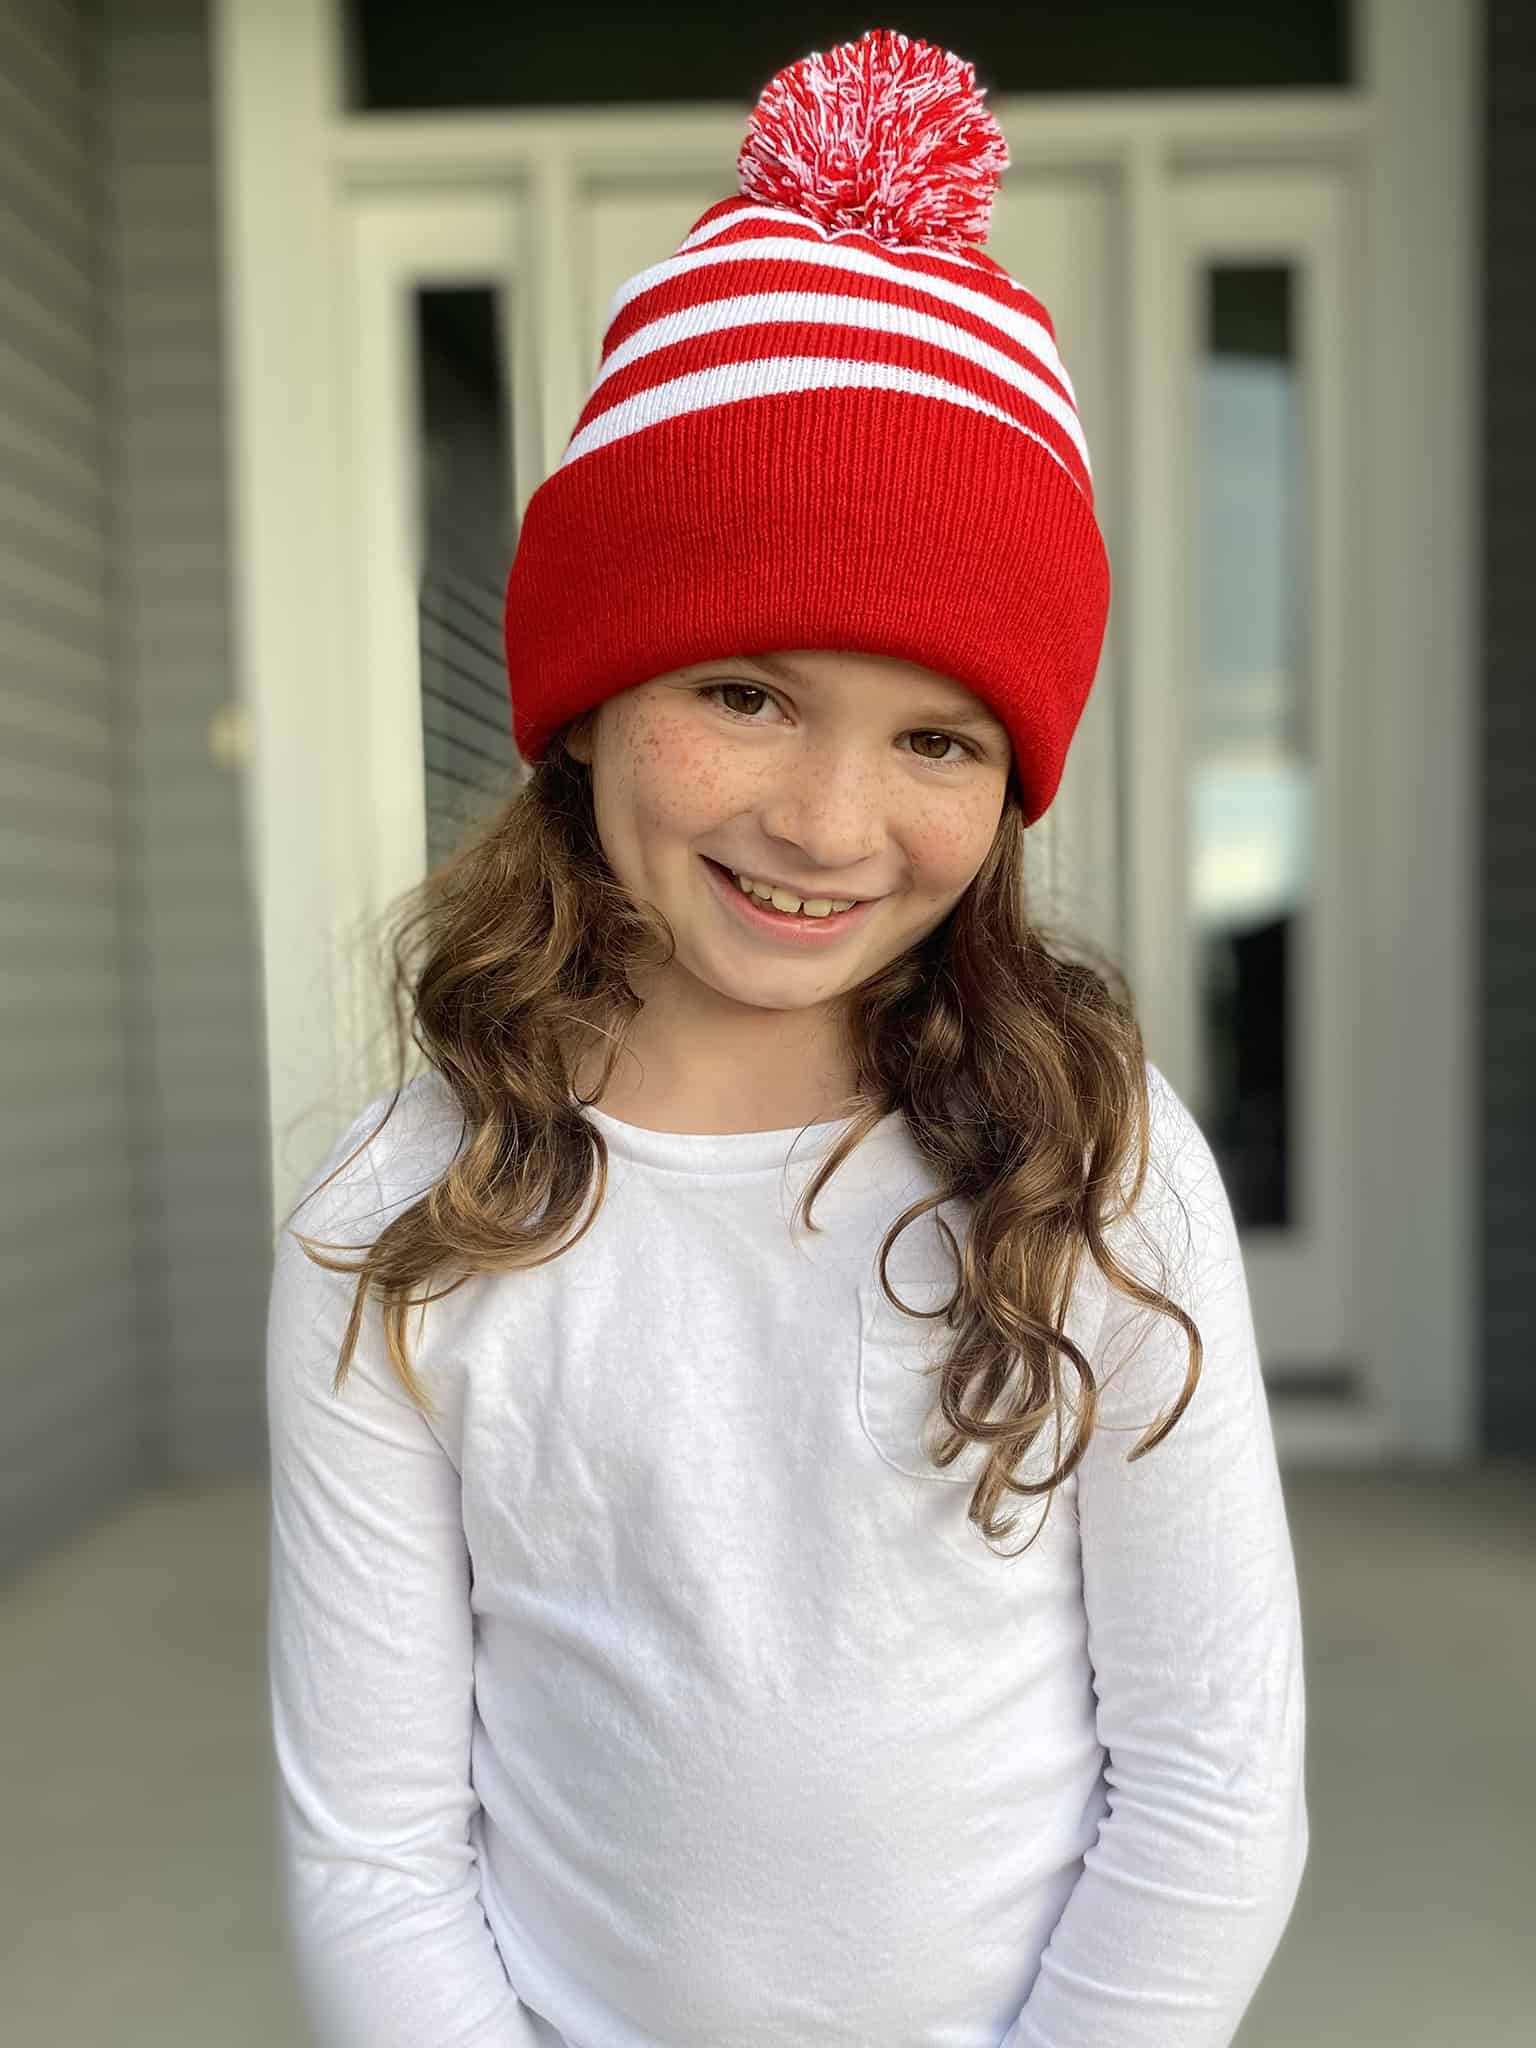 A beautiful smile wearing a striped cap #forRMHC